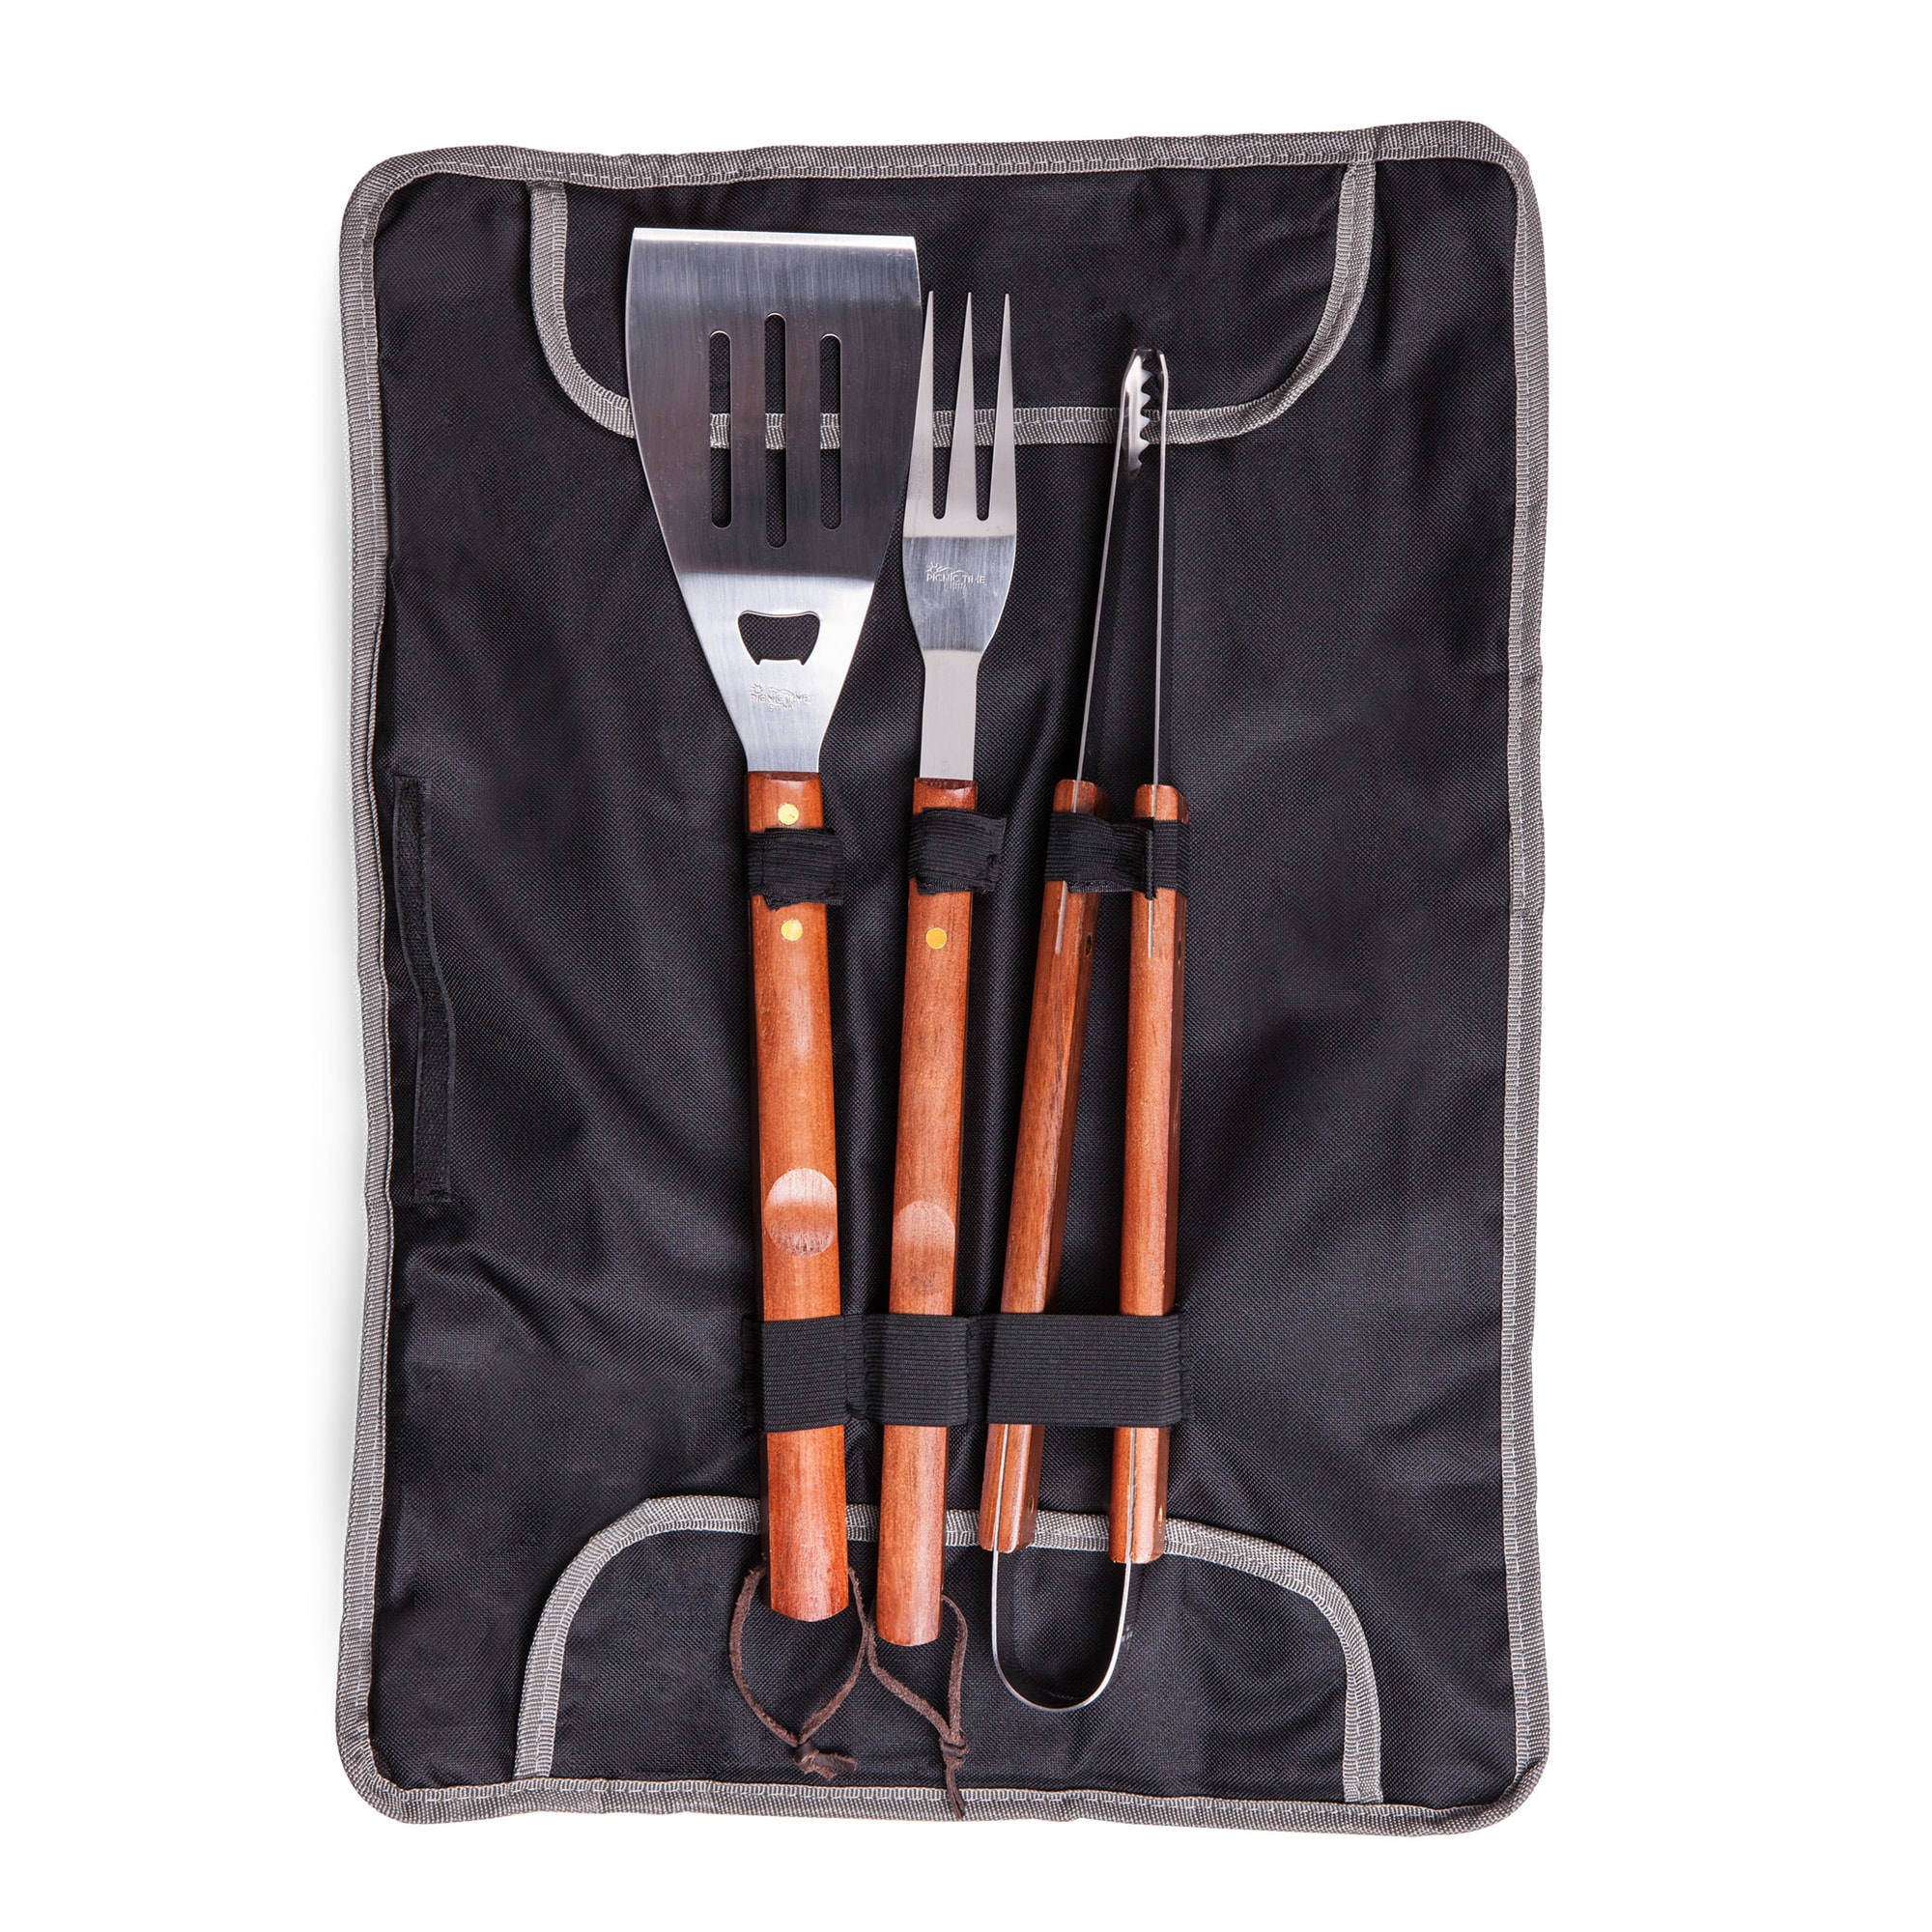 Iowa Team Sports Hawkeyes 3 Piece BBQ Tool Set and Tote - image 2 of 2